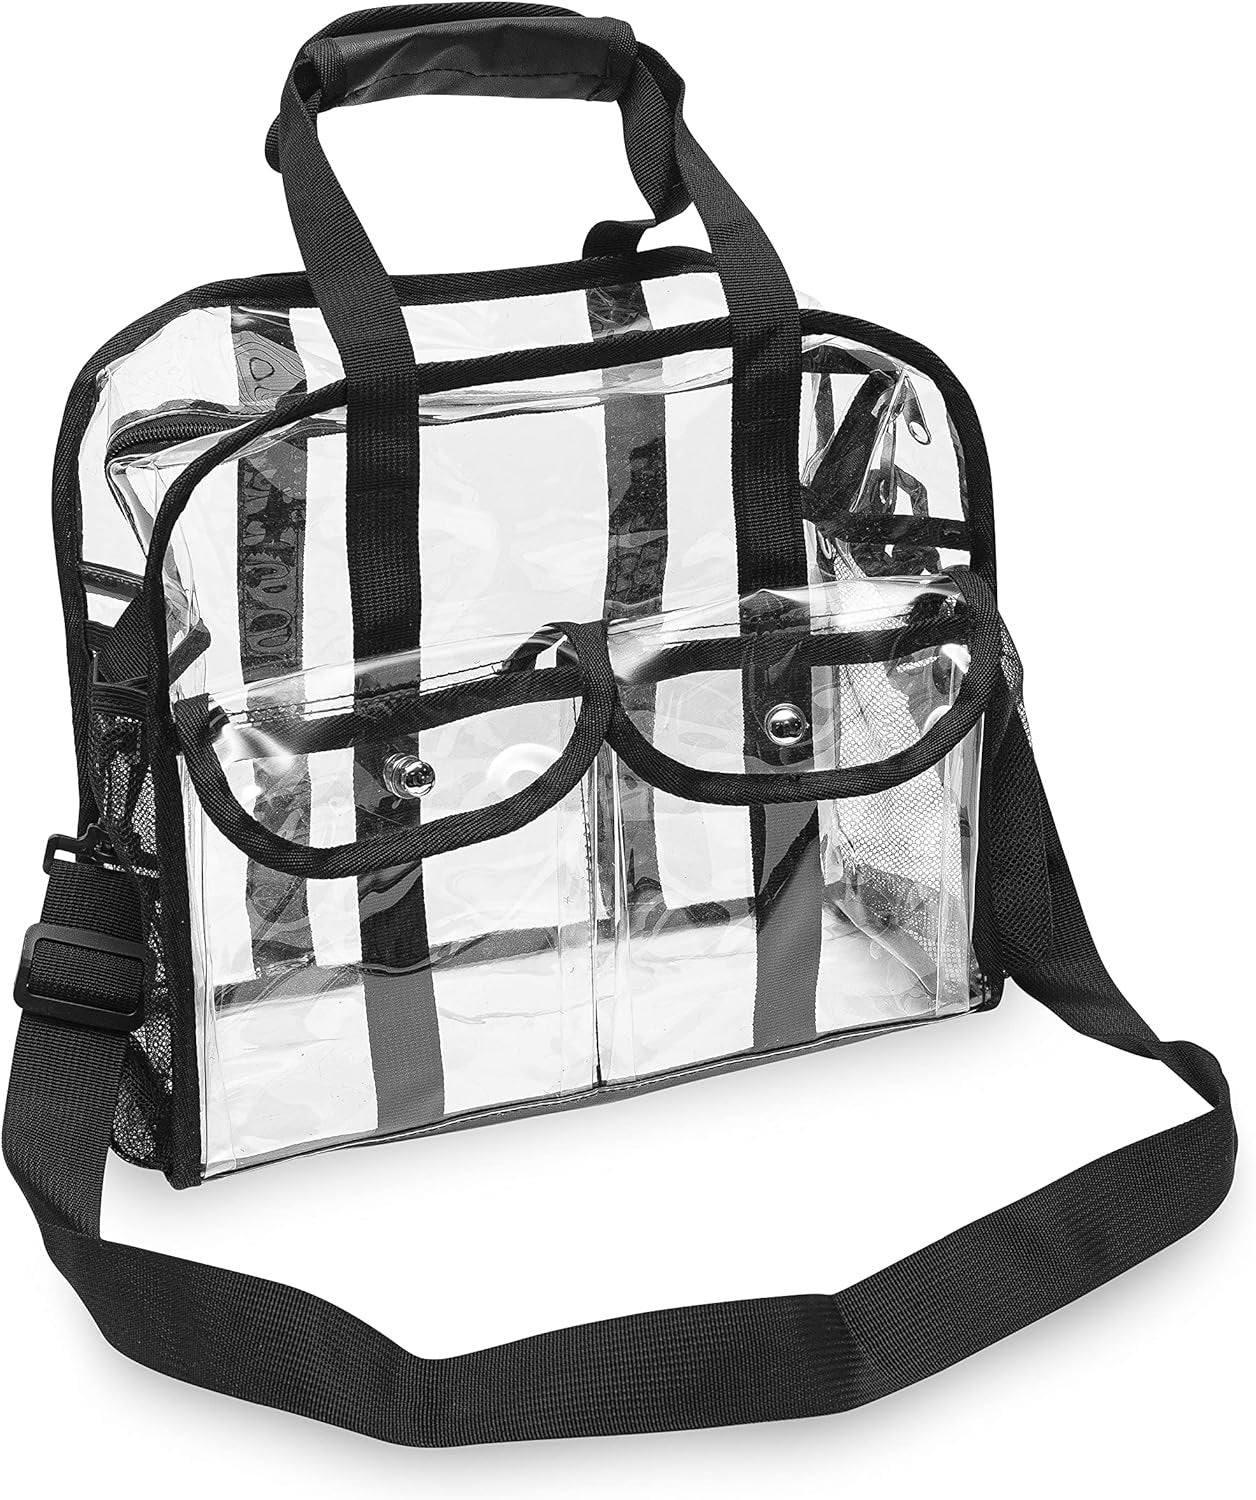 Clear Tote Bag - 12x6x12 Clear Stadium Bag, Transparent Water Resistant Plastic Messenger Tote with Handles, Shoulder Strap, & Pockets, Approved for Stadium Events, Concert, Festivals, Travel, Work